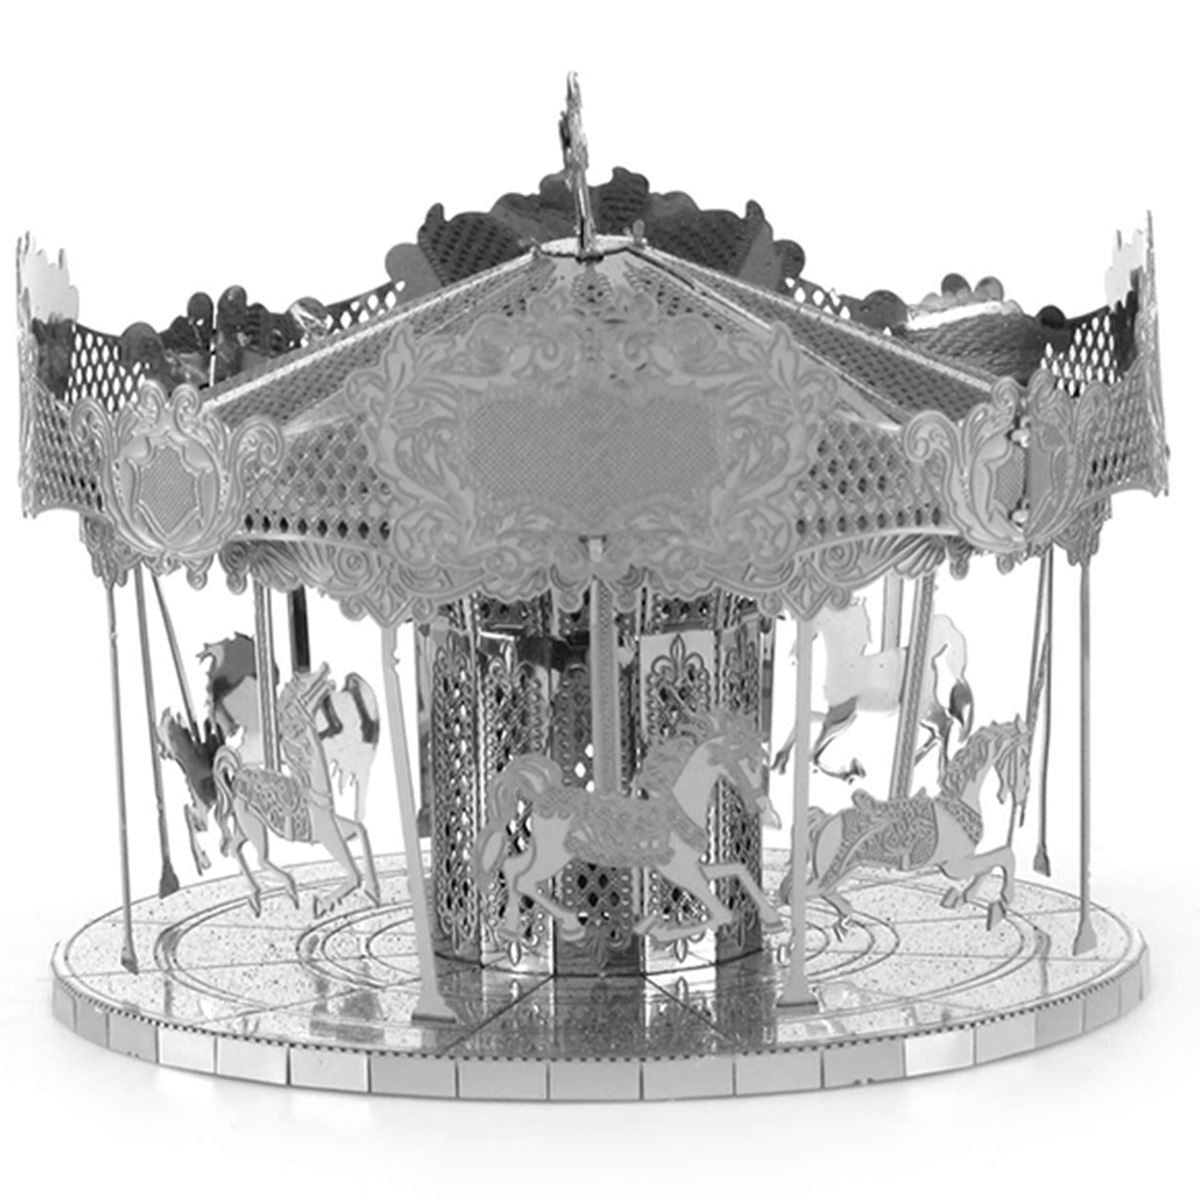 Merry Go Round | Architecture | Metal Earth